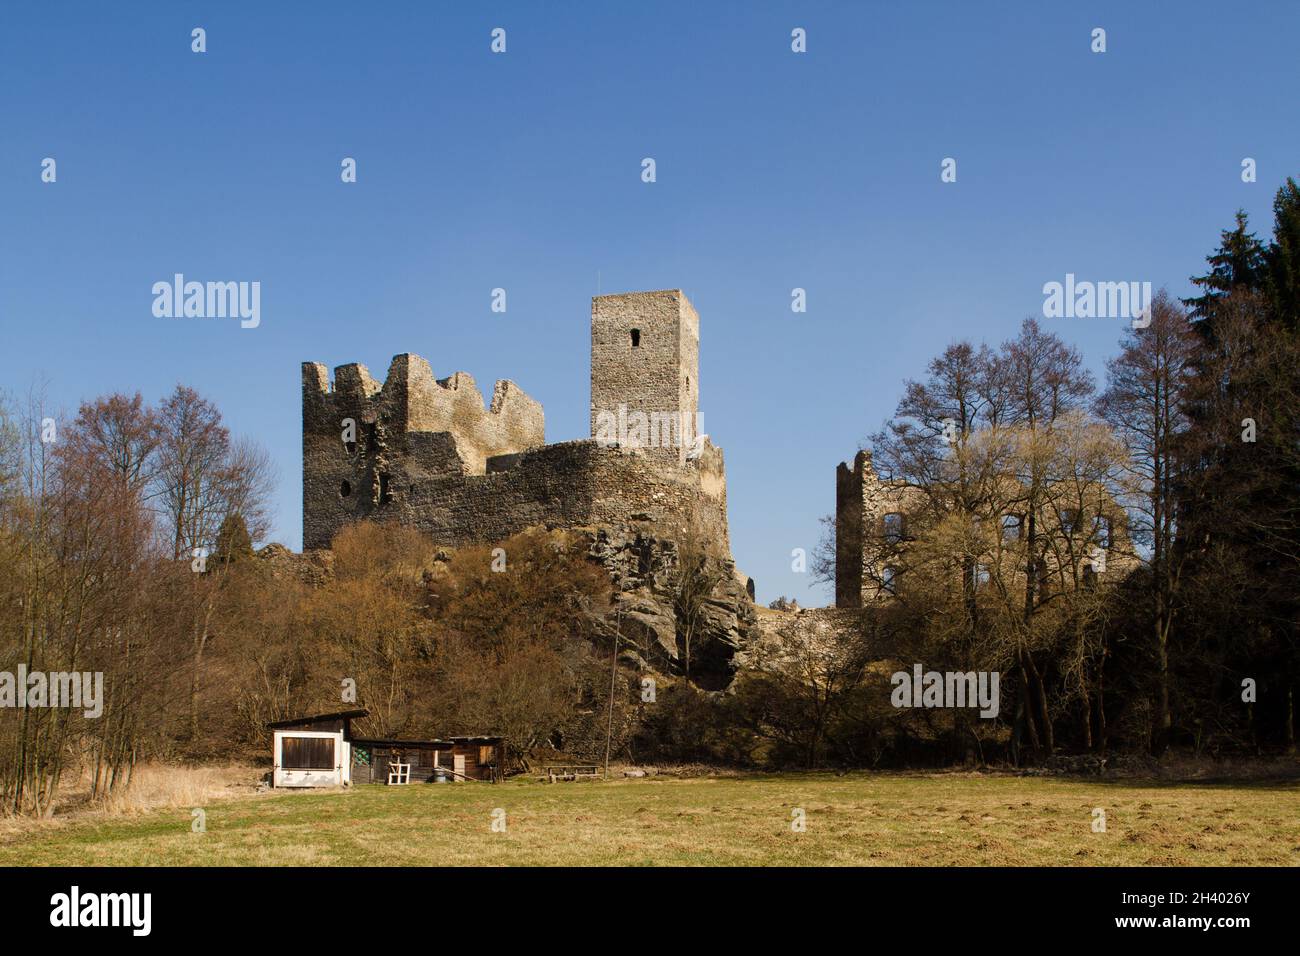 Ruin of gothic 13th century castle Rokštejn in Czech republic with an unused campground in front of it. Stock Photo